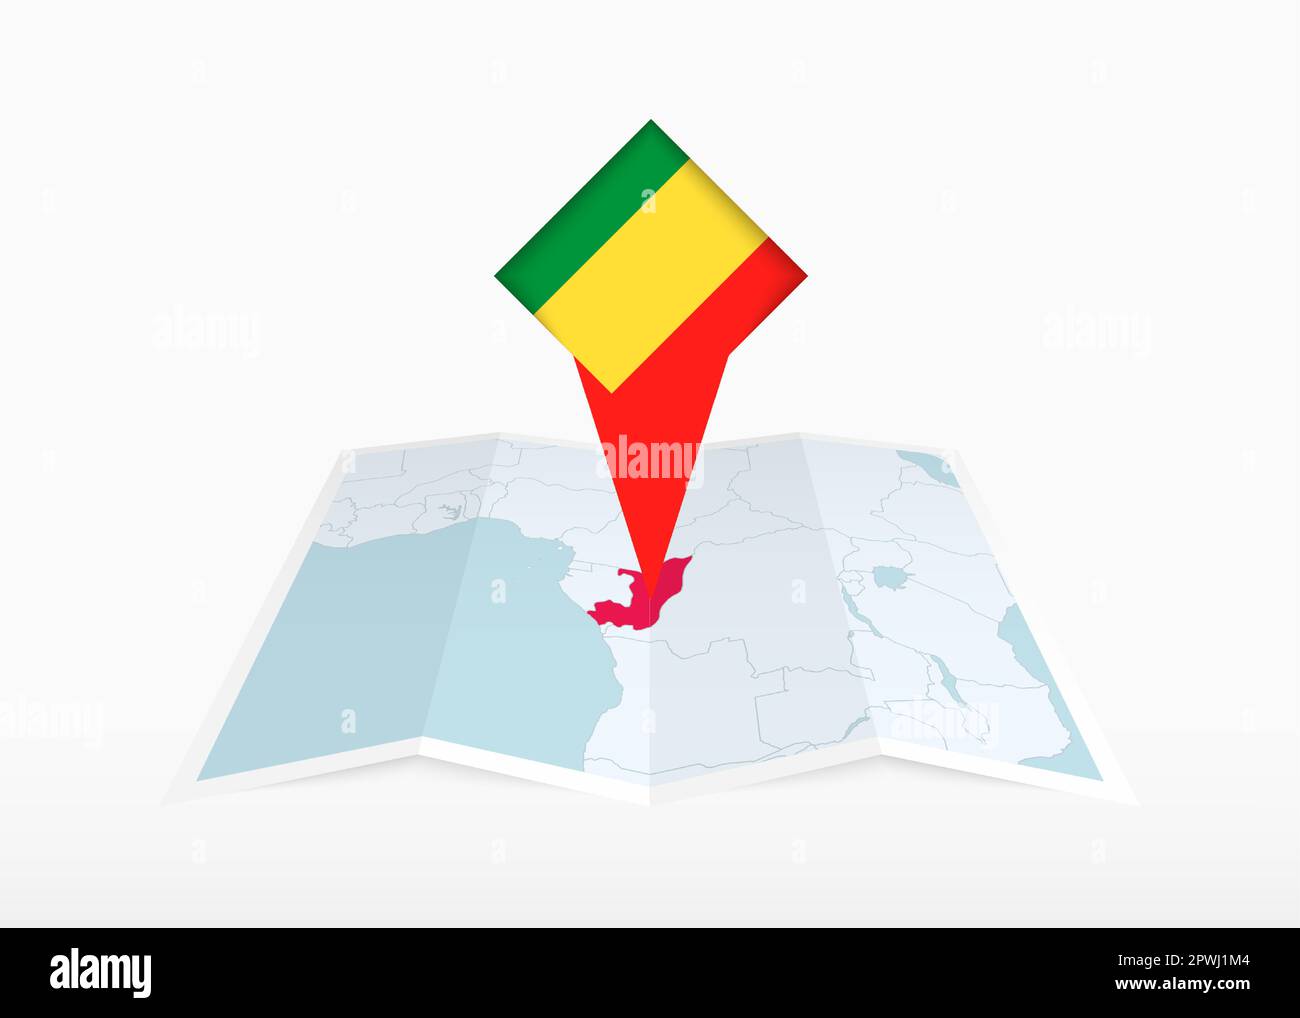 Congo is depicted on a folded paper map and pinned location marker with flag of Congo. Folded vector map. Stock Vector